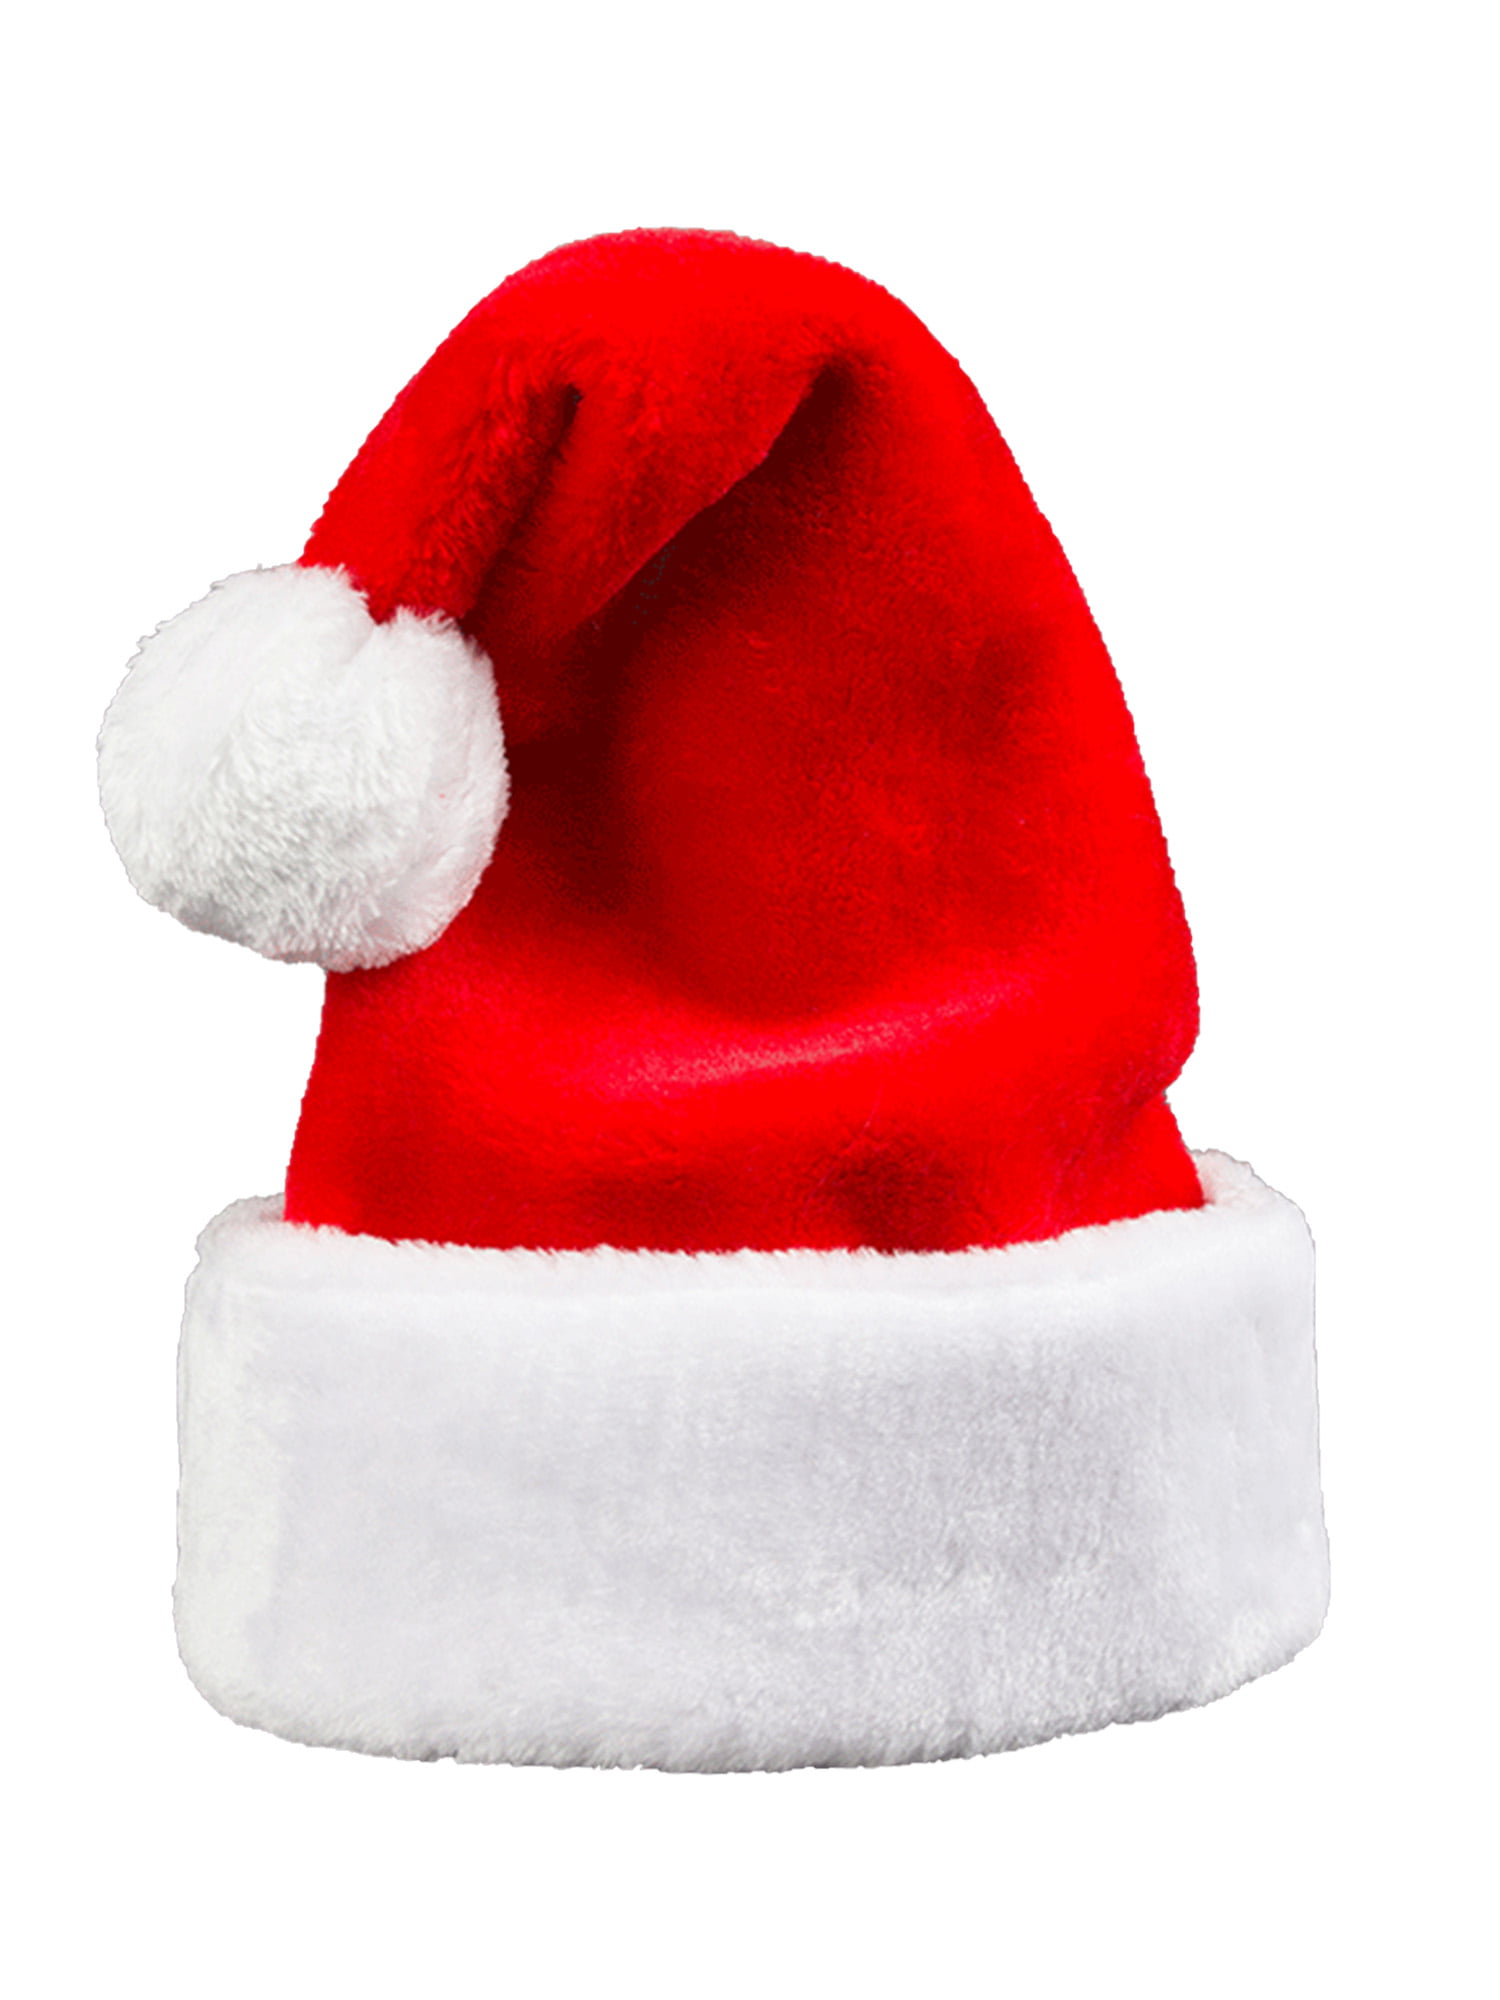 Details about   Christmas Red Santa Claus Snowman Hat Plush Thicken Kid Adult Hat Festival Gifts 